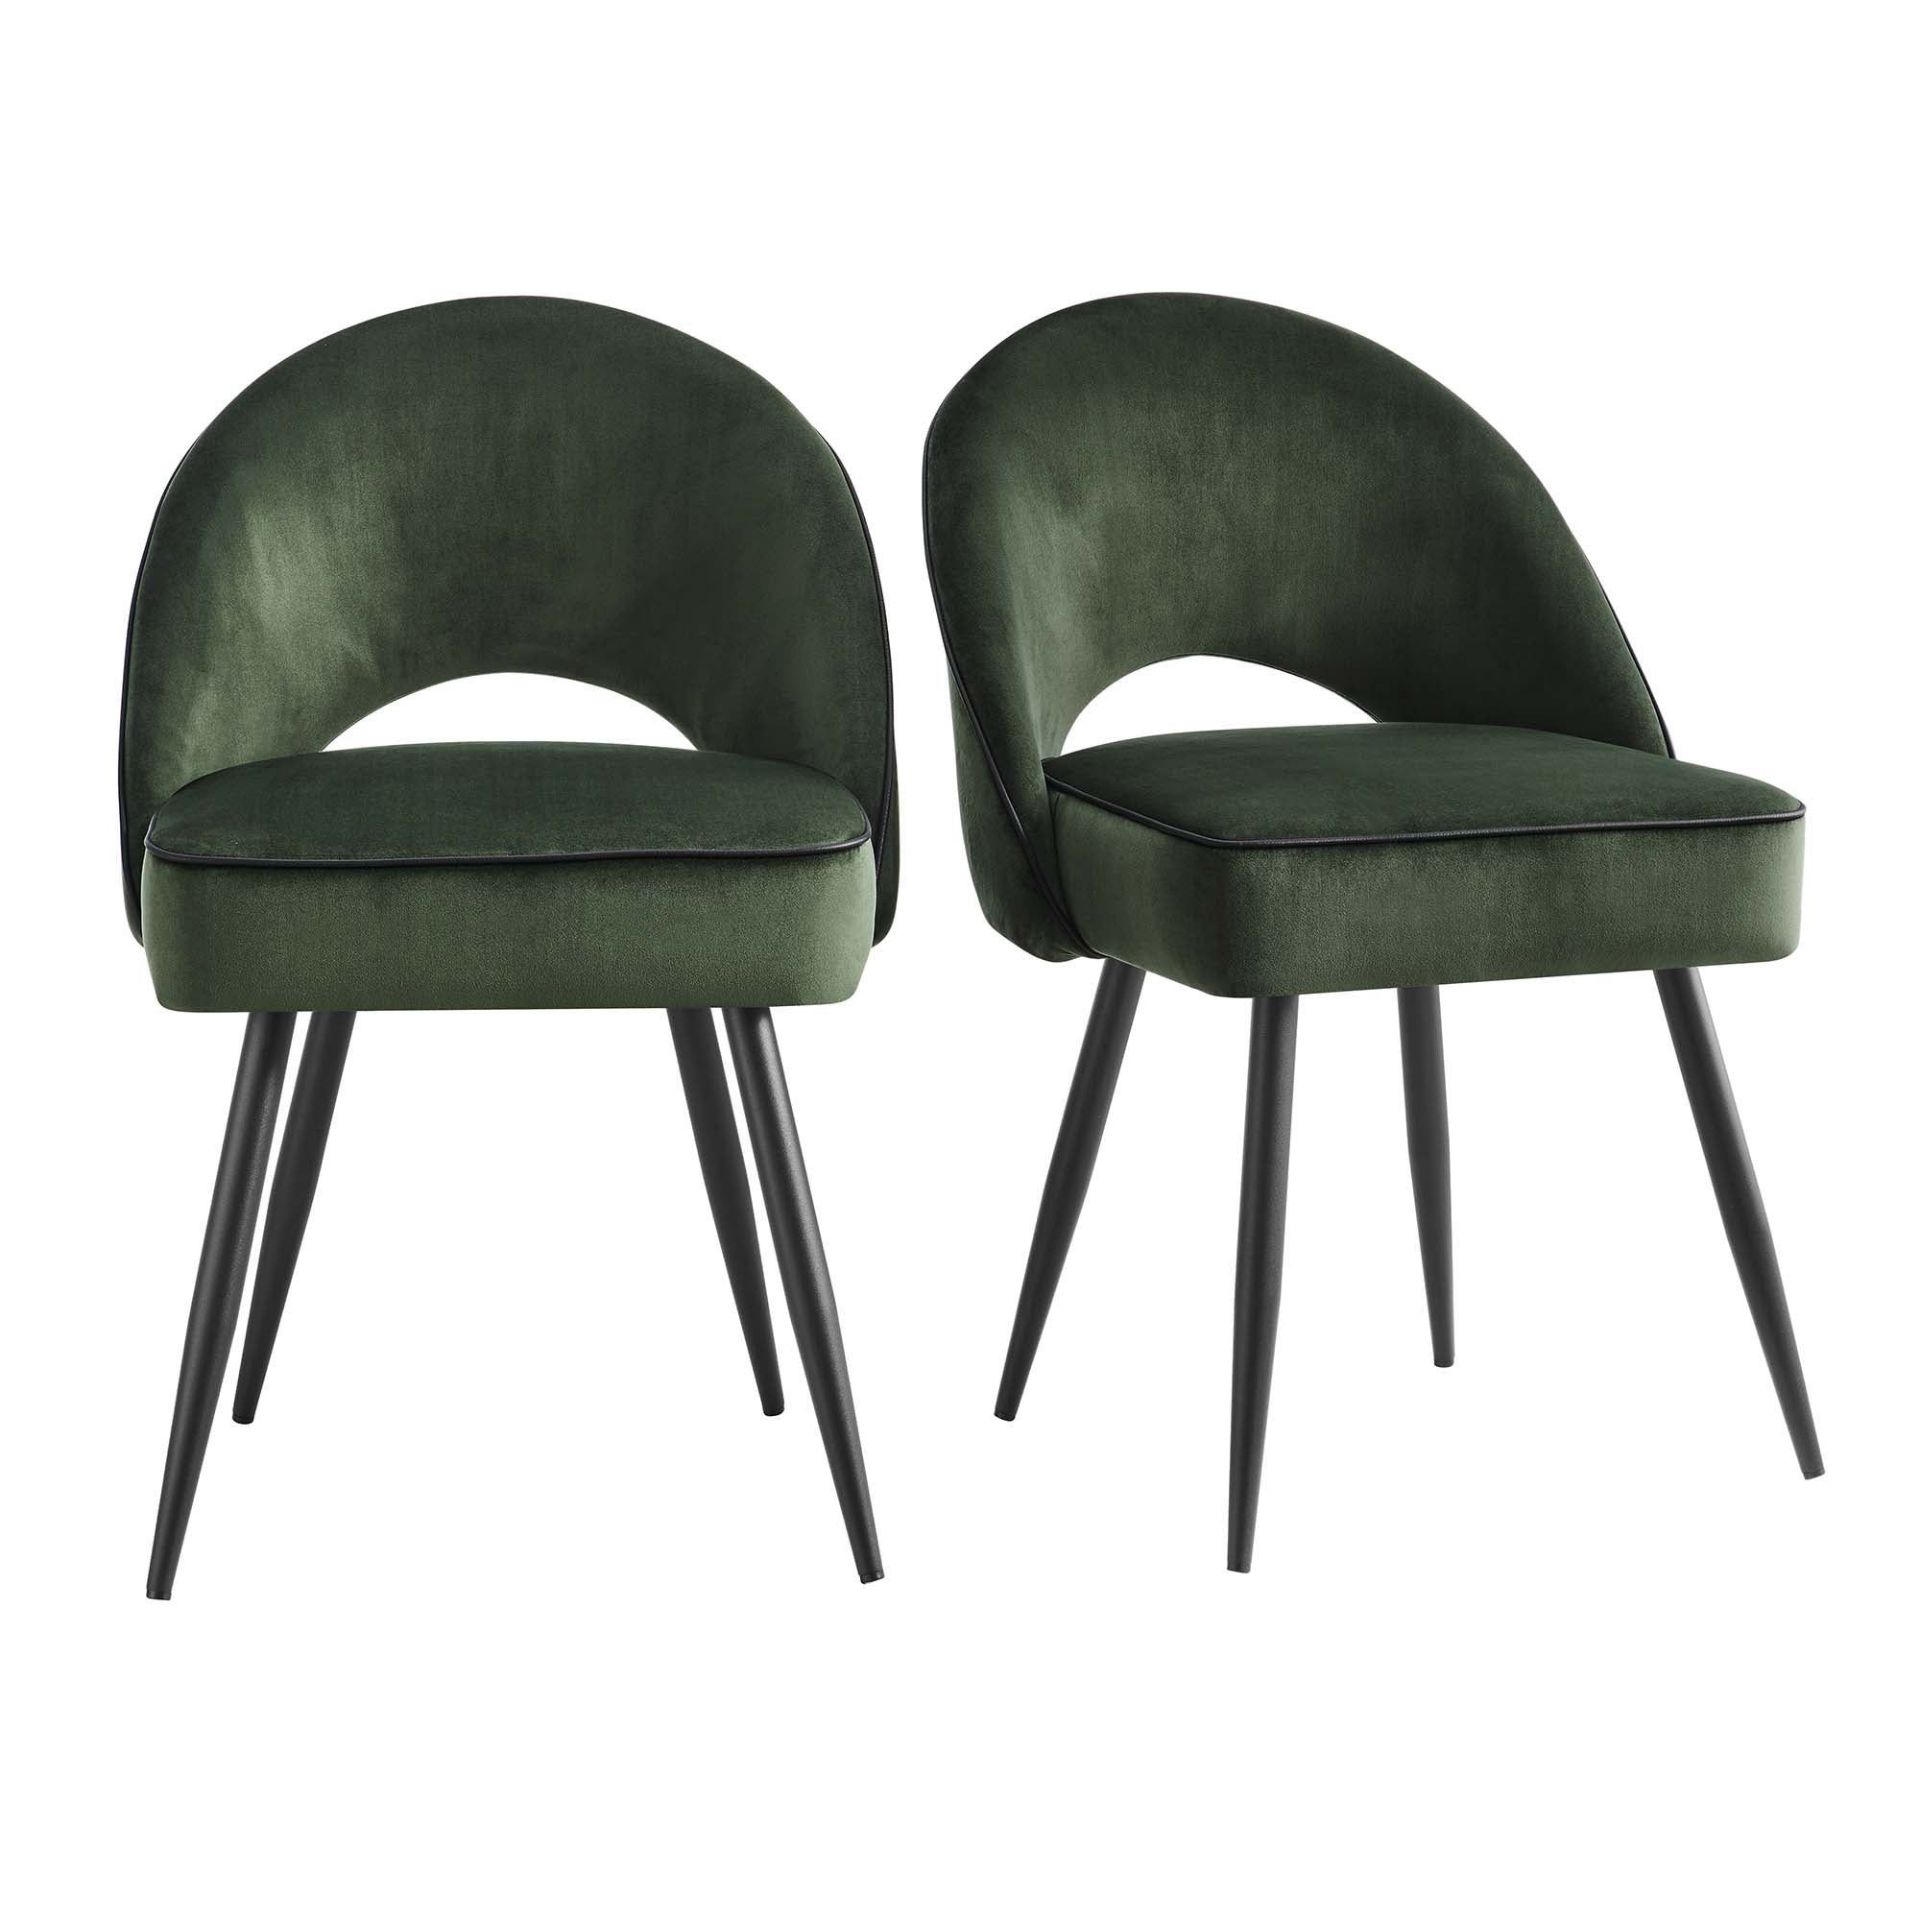 Oakley Set of 2 Dark Green Velvet Upholstered Dining Chairs with Contrast Piping. - R13.14. RRP £ - Image 4 of 4